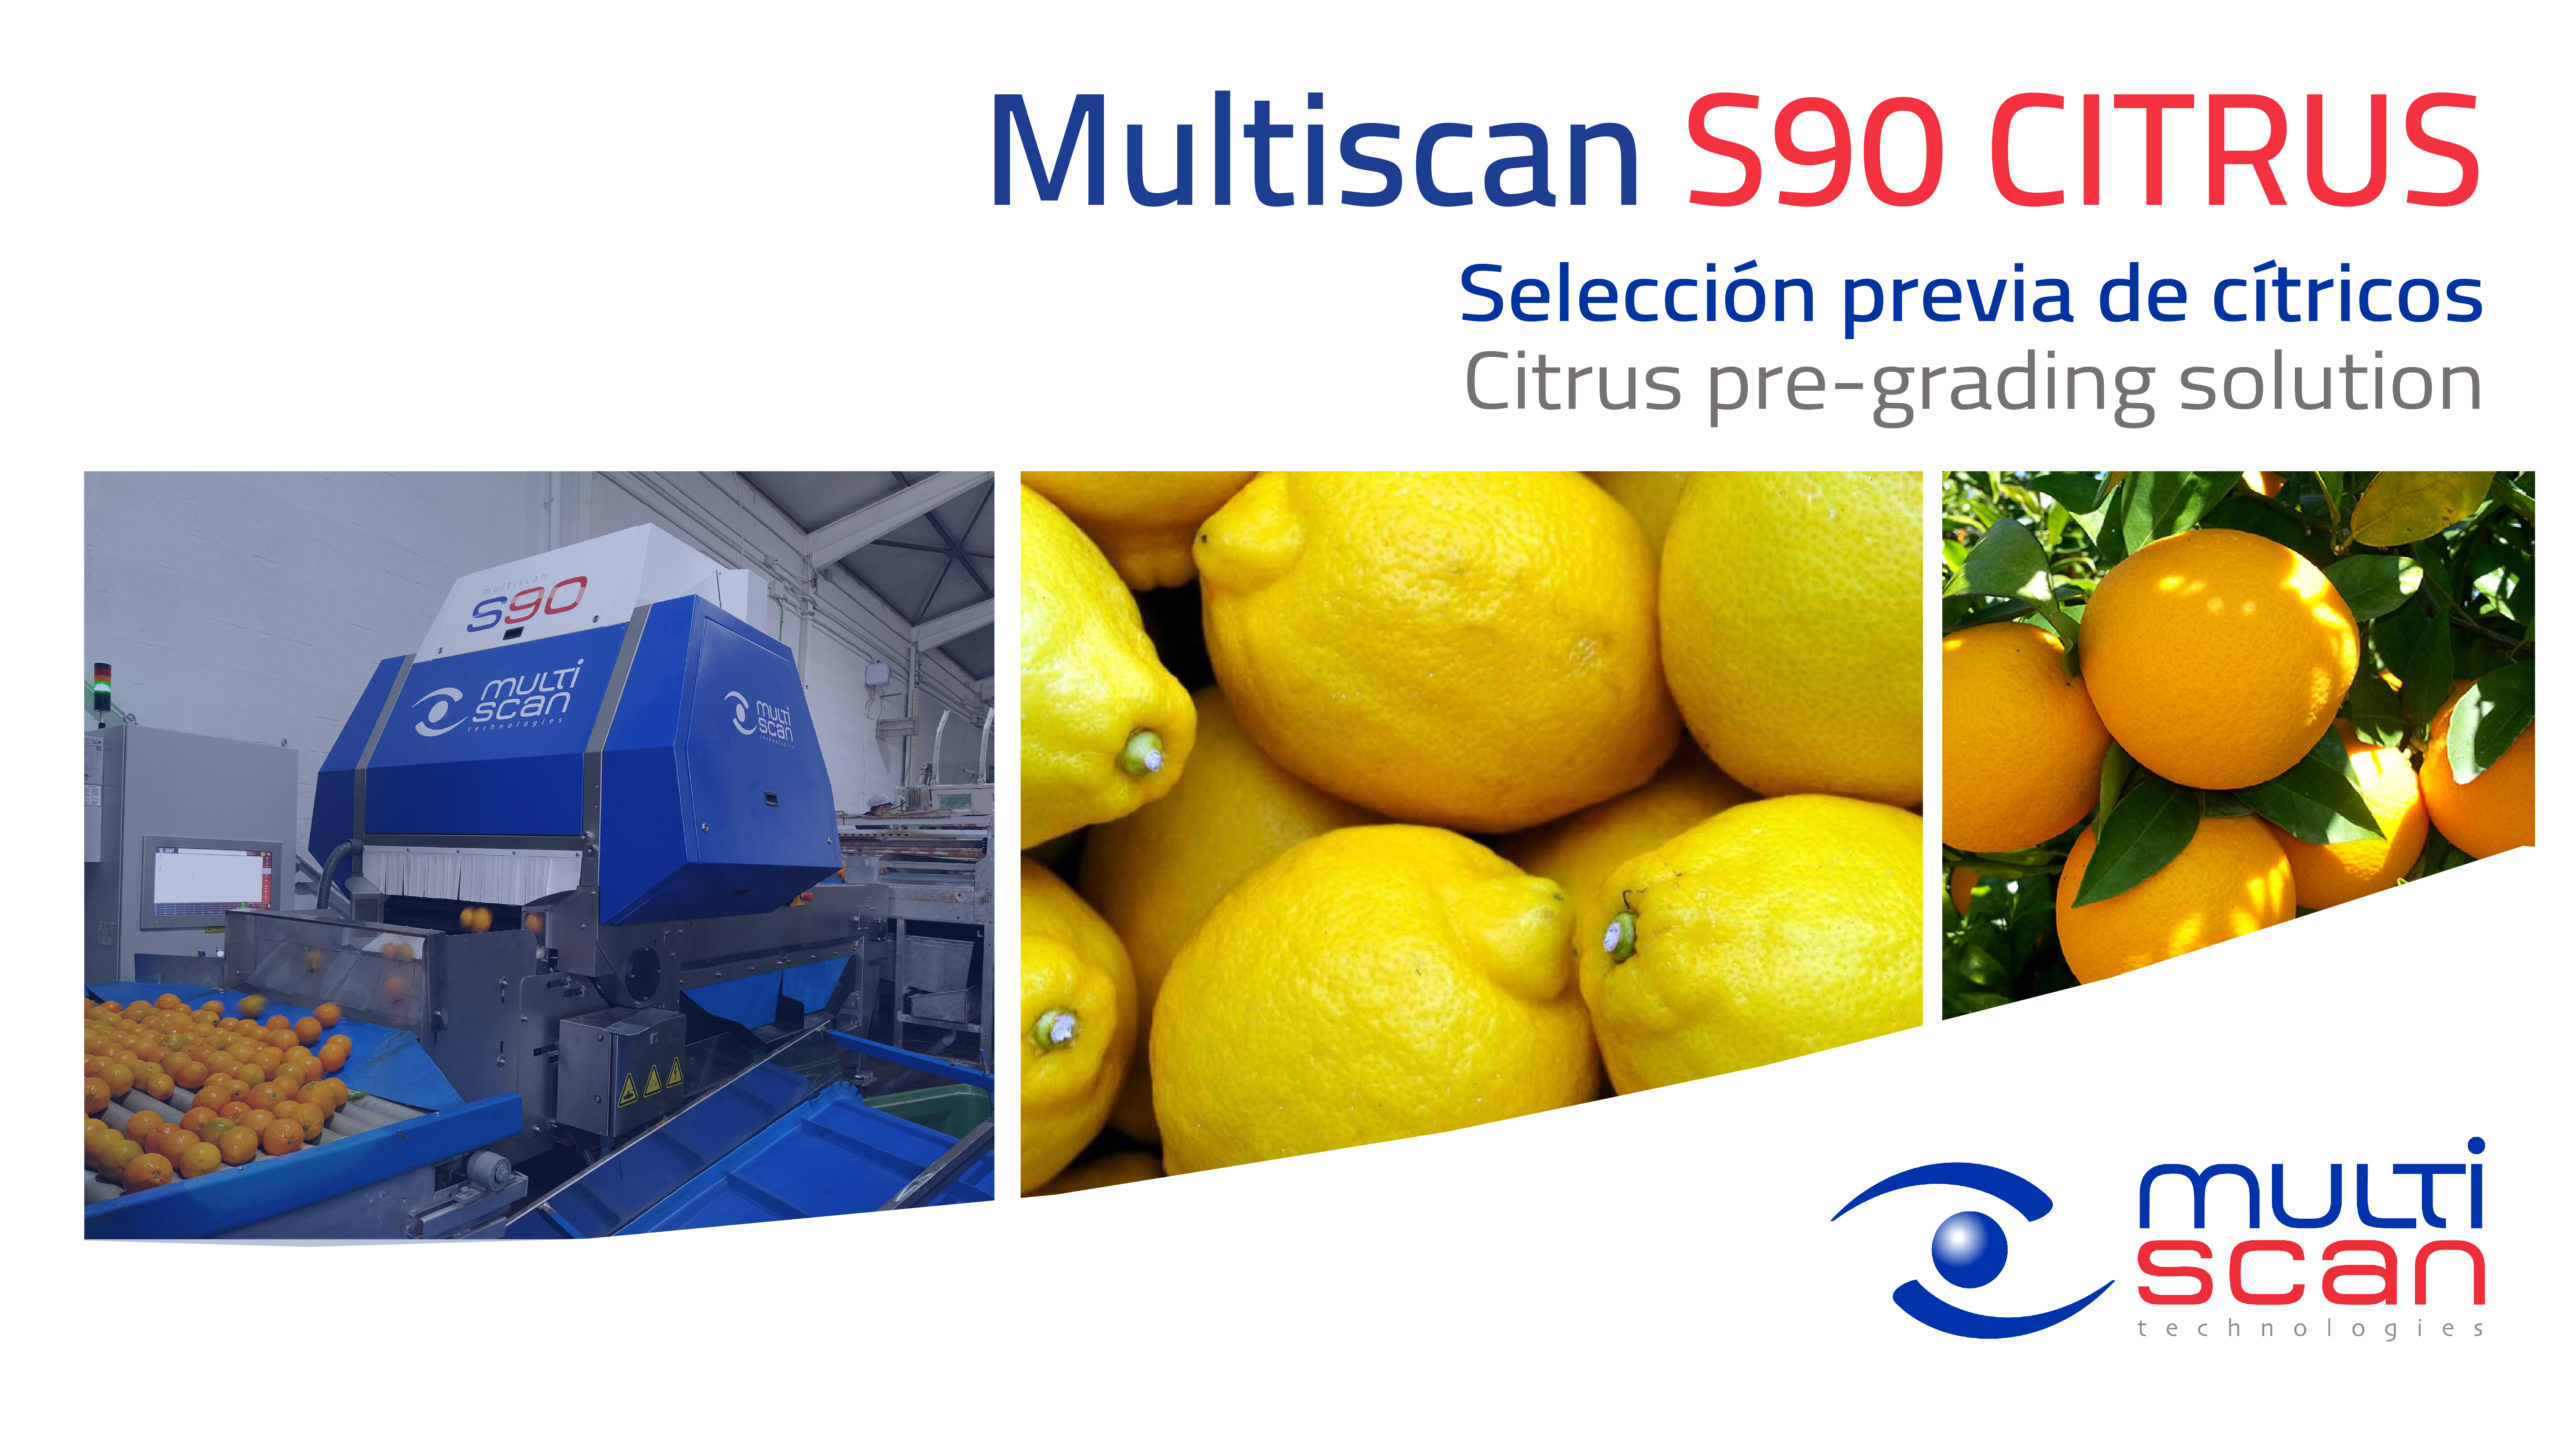 Multiscan Technologies launches the new Multiscan S90 Citrus sorter